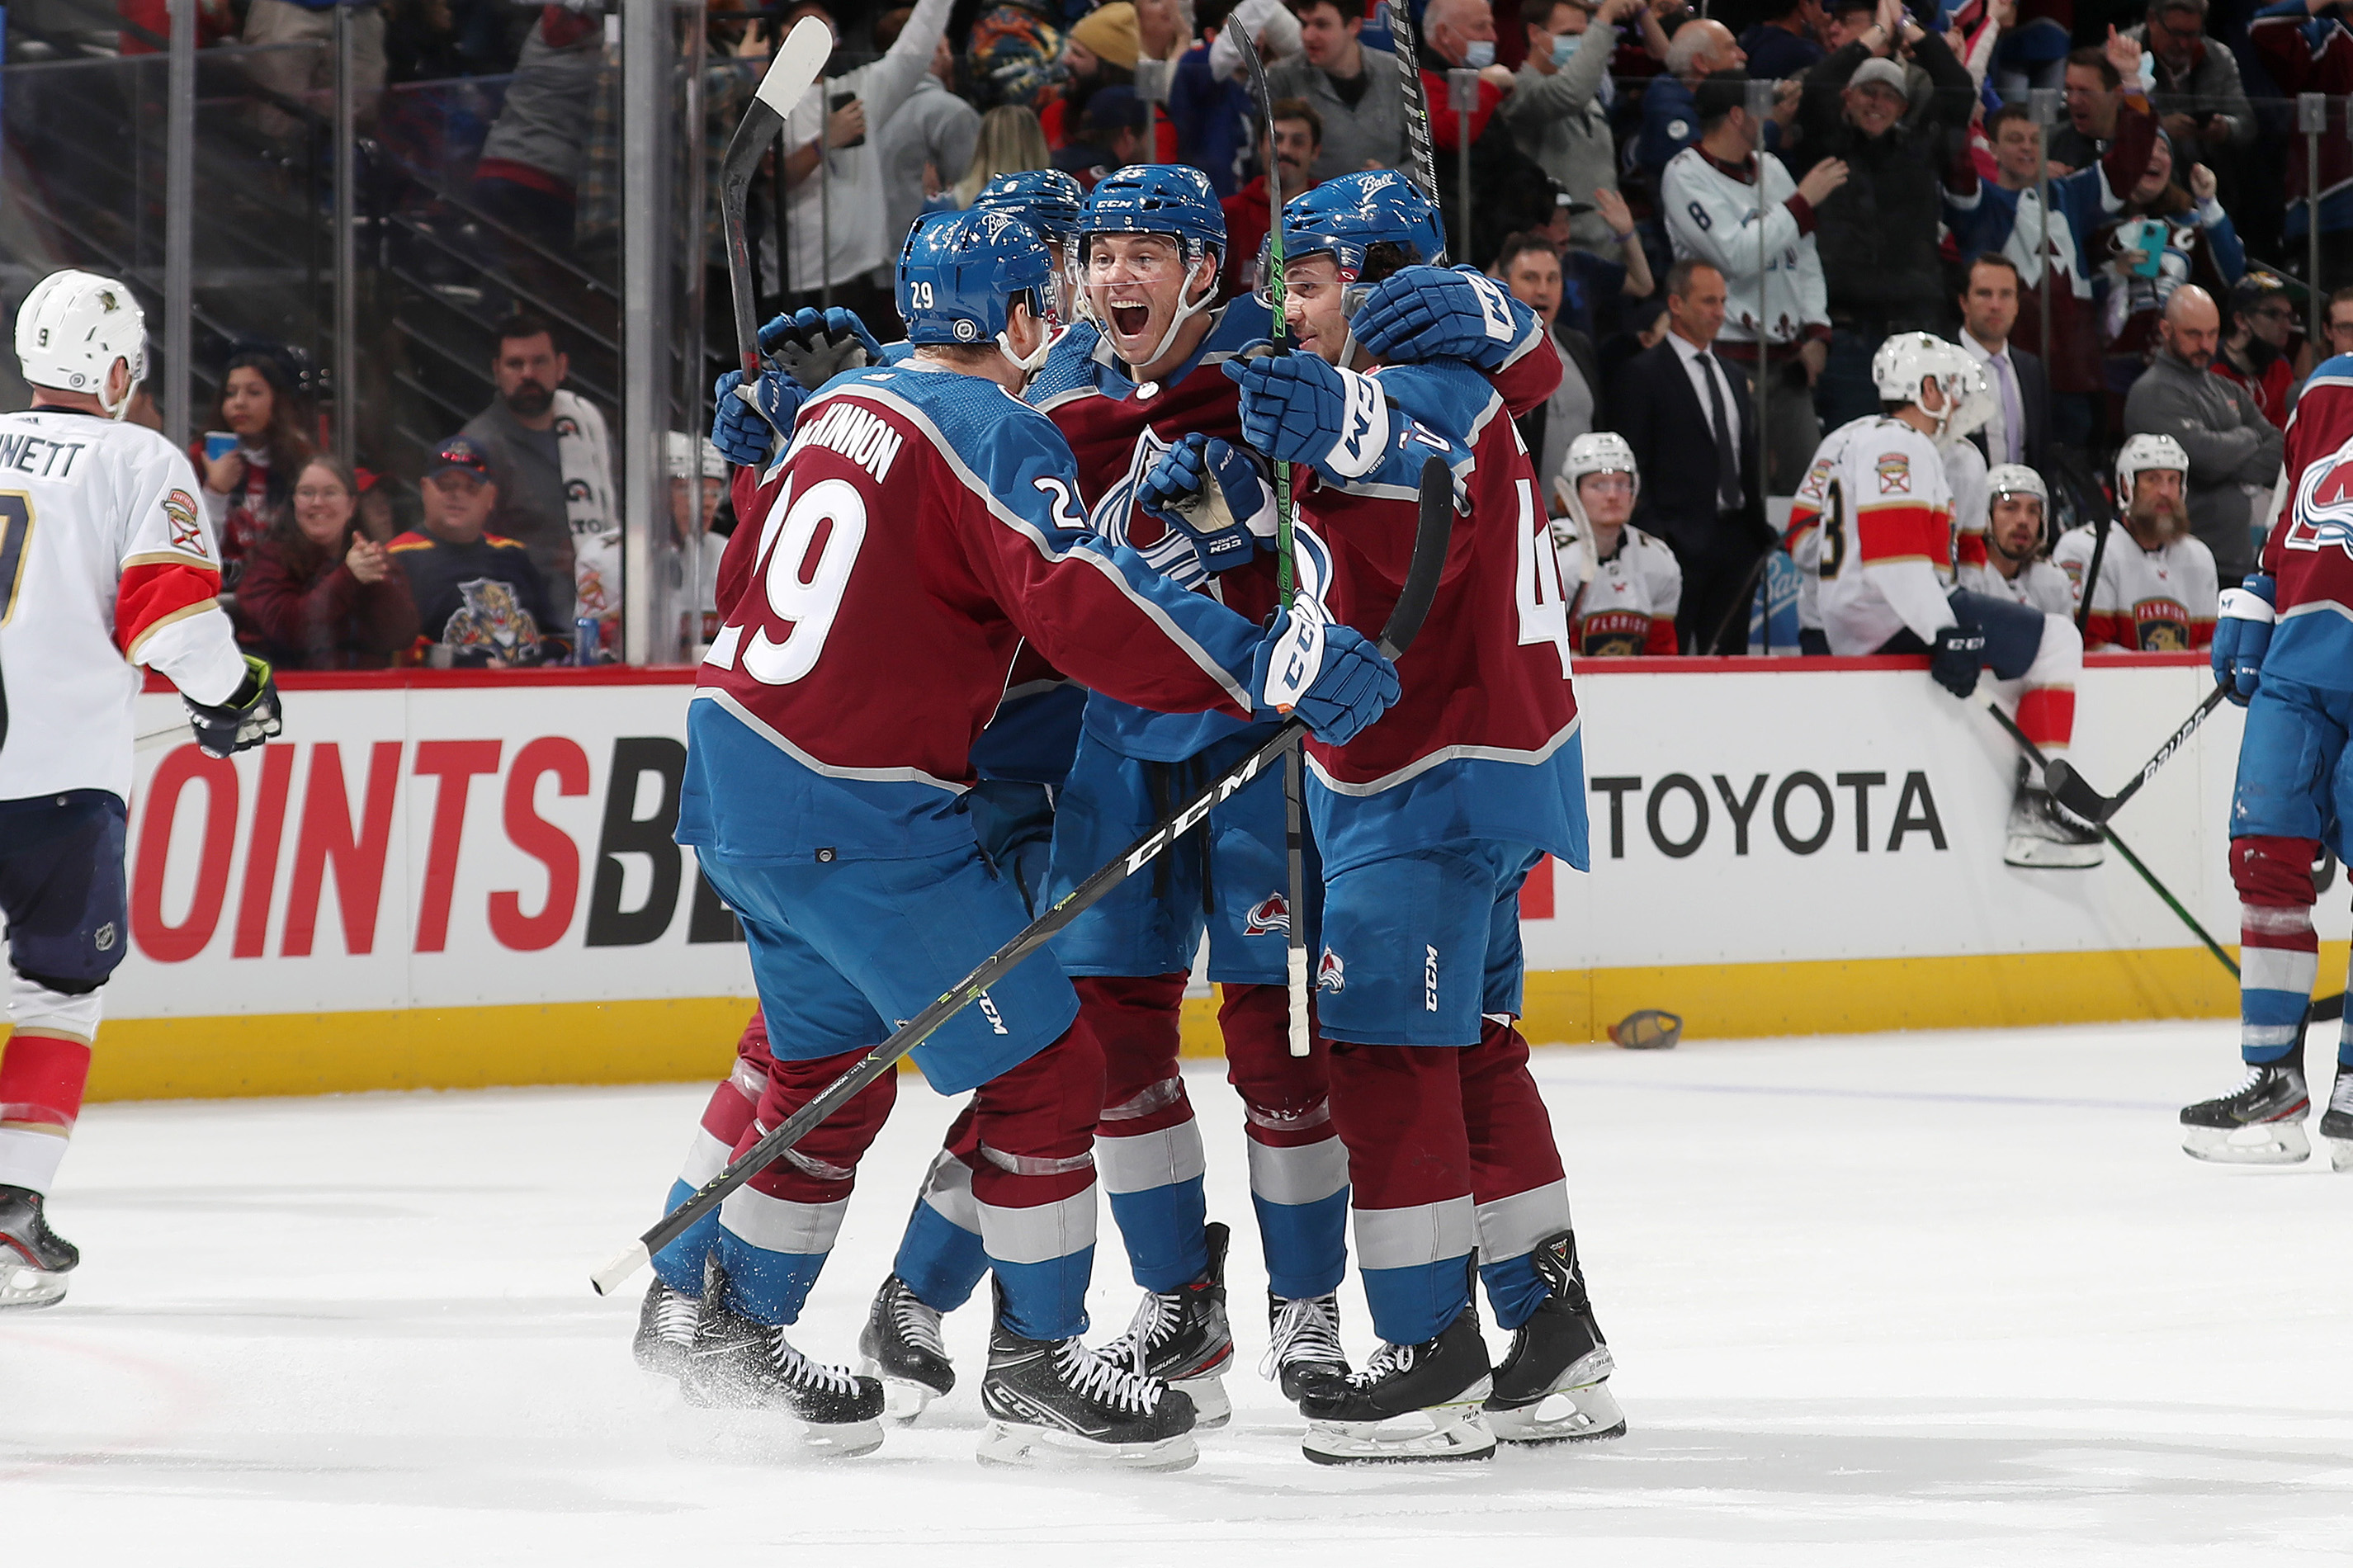 Andre Burakovsky of the Colorado Avalanche celebrates this third goal of the game against the Florida Panthers with teammates Nathan MacKinnon #29, Erik Johnson #6 and Samuel Girard #49 at Ball Arena on December 12, 2021.